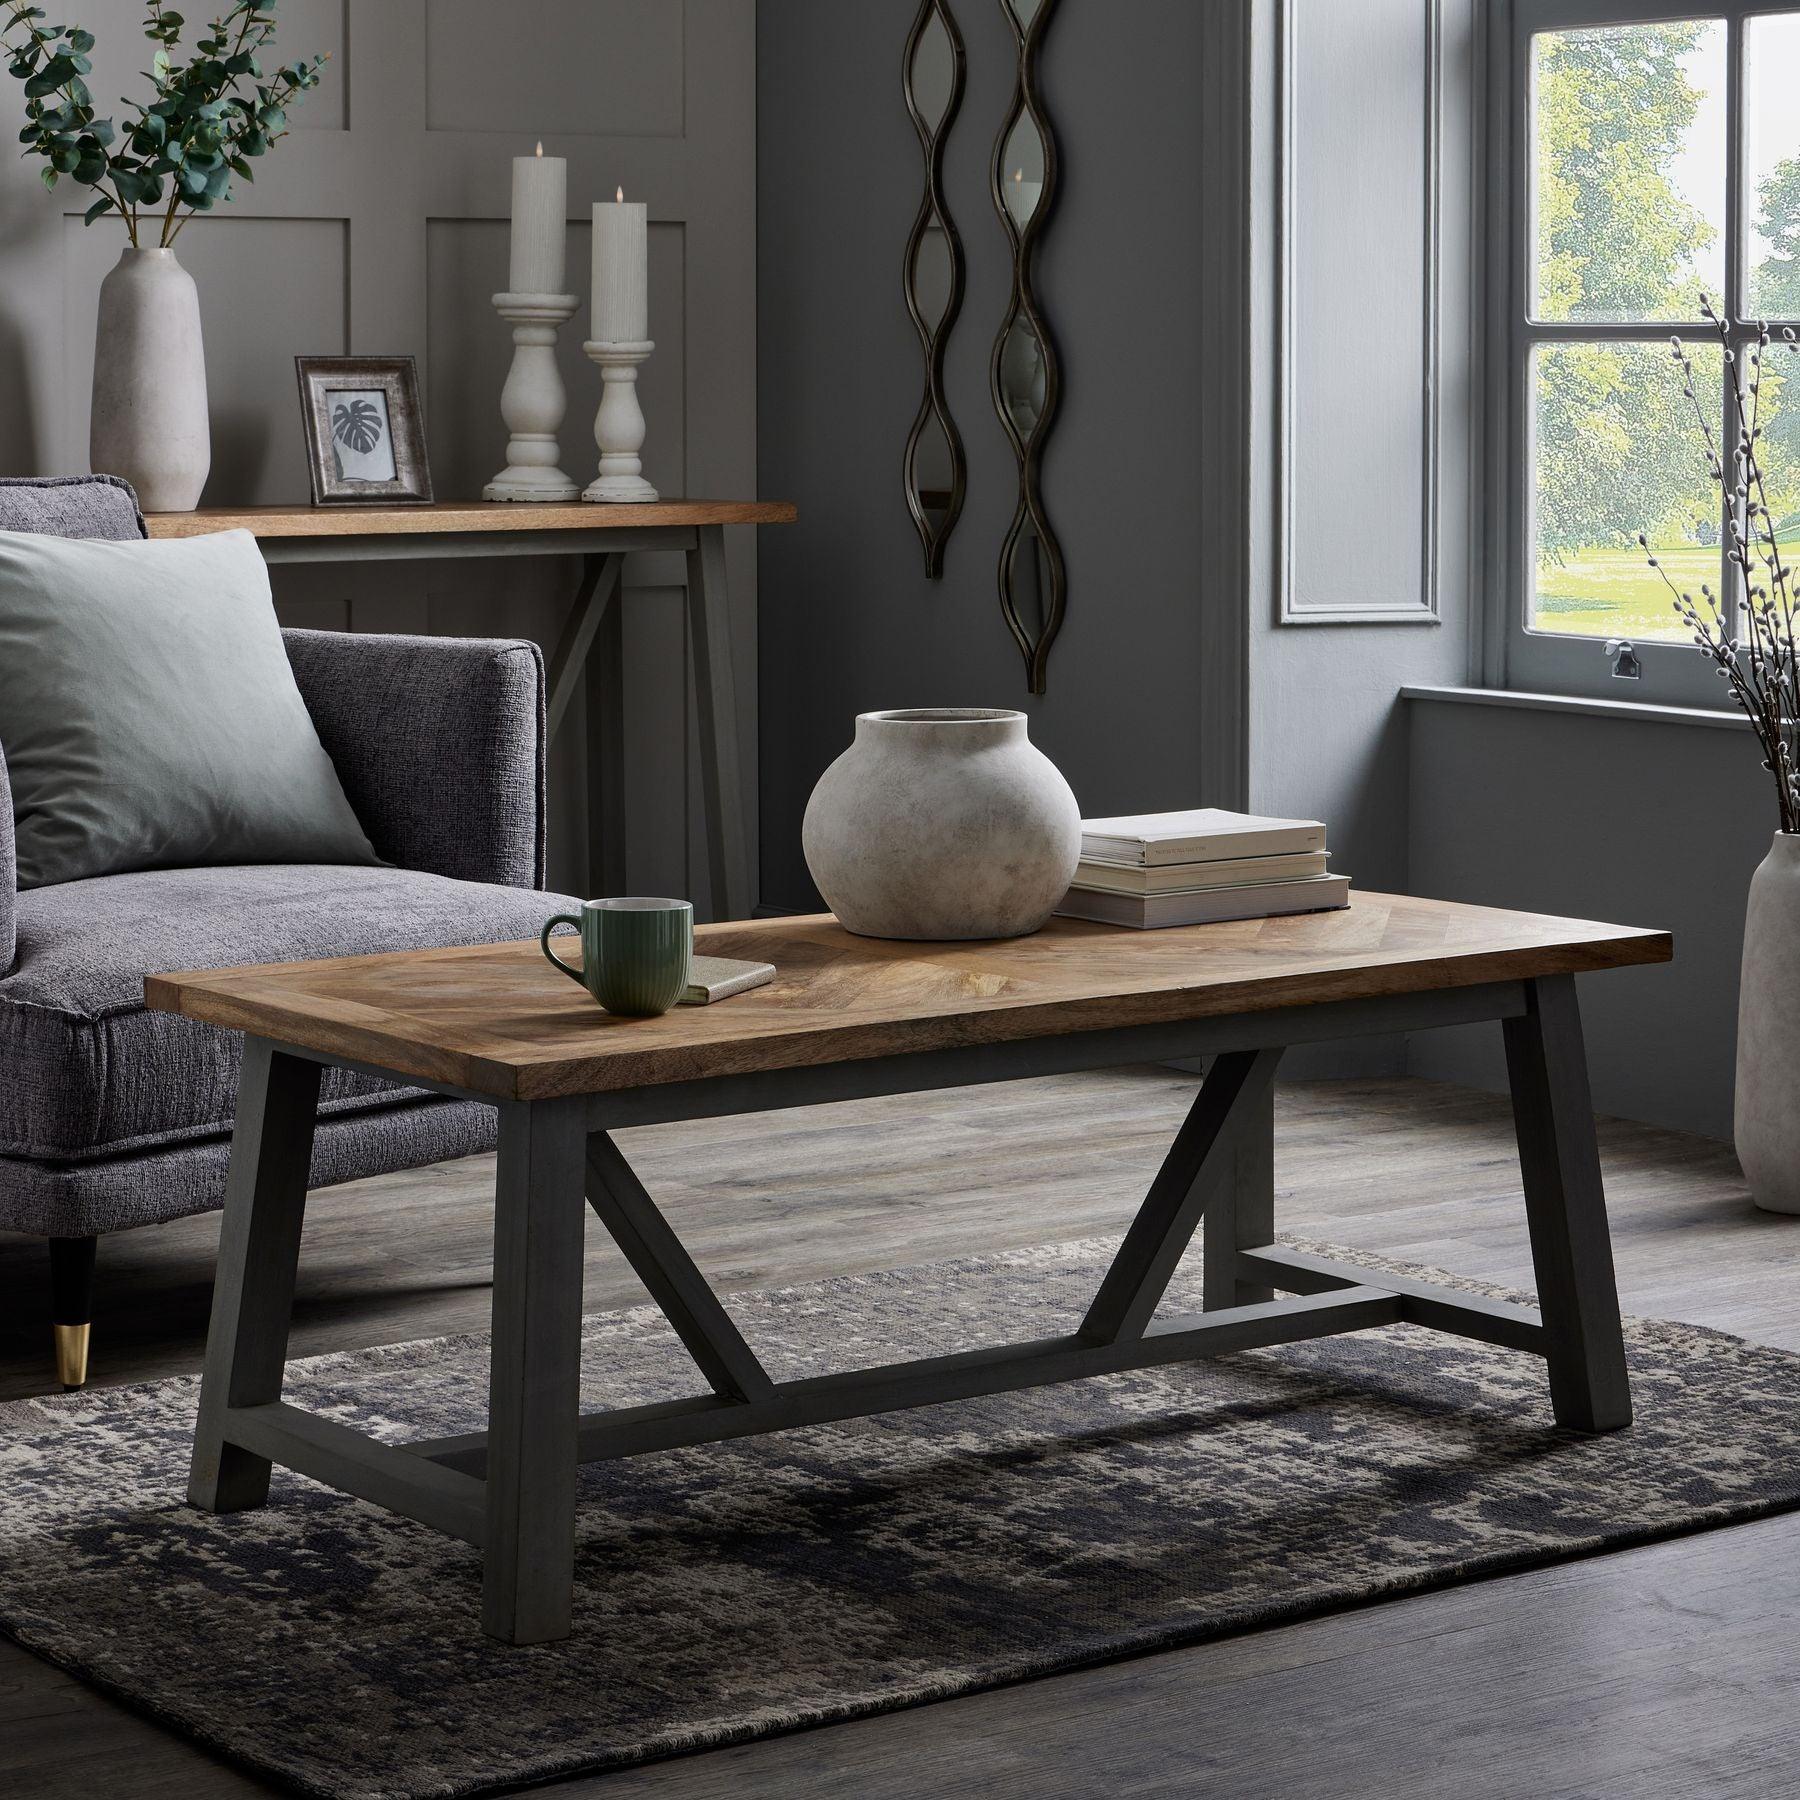 View Nordic Grey Collection Coffee Table information